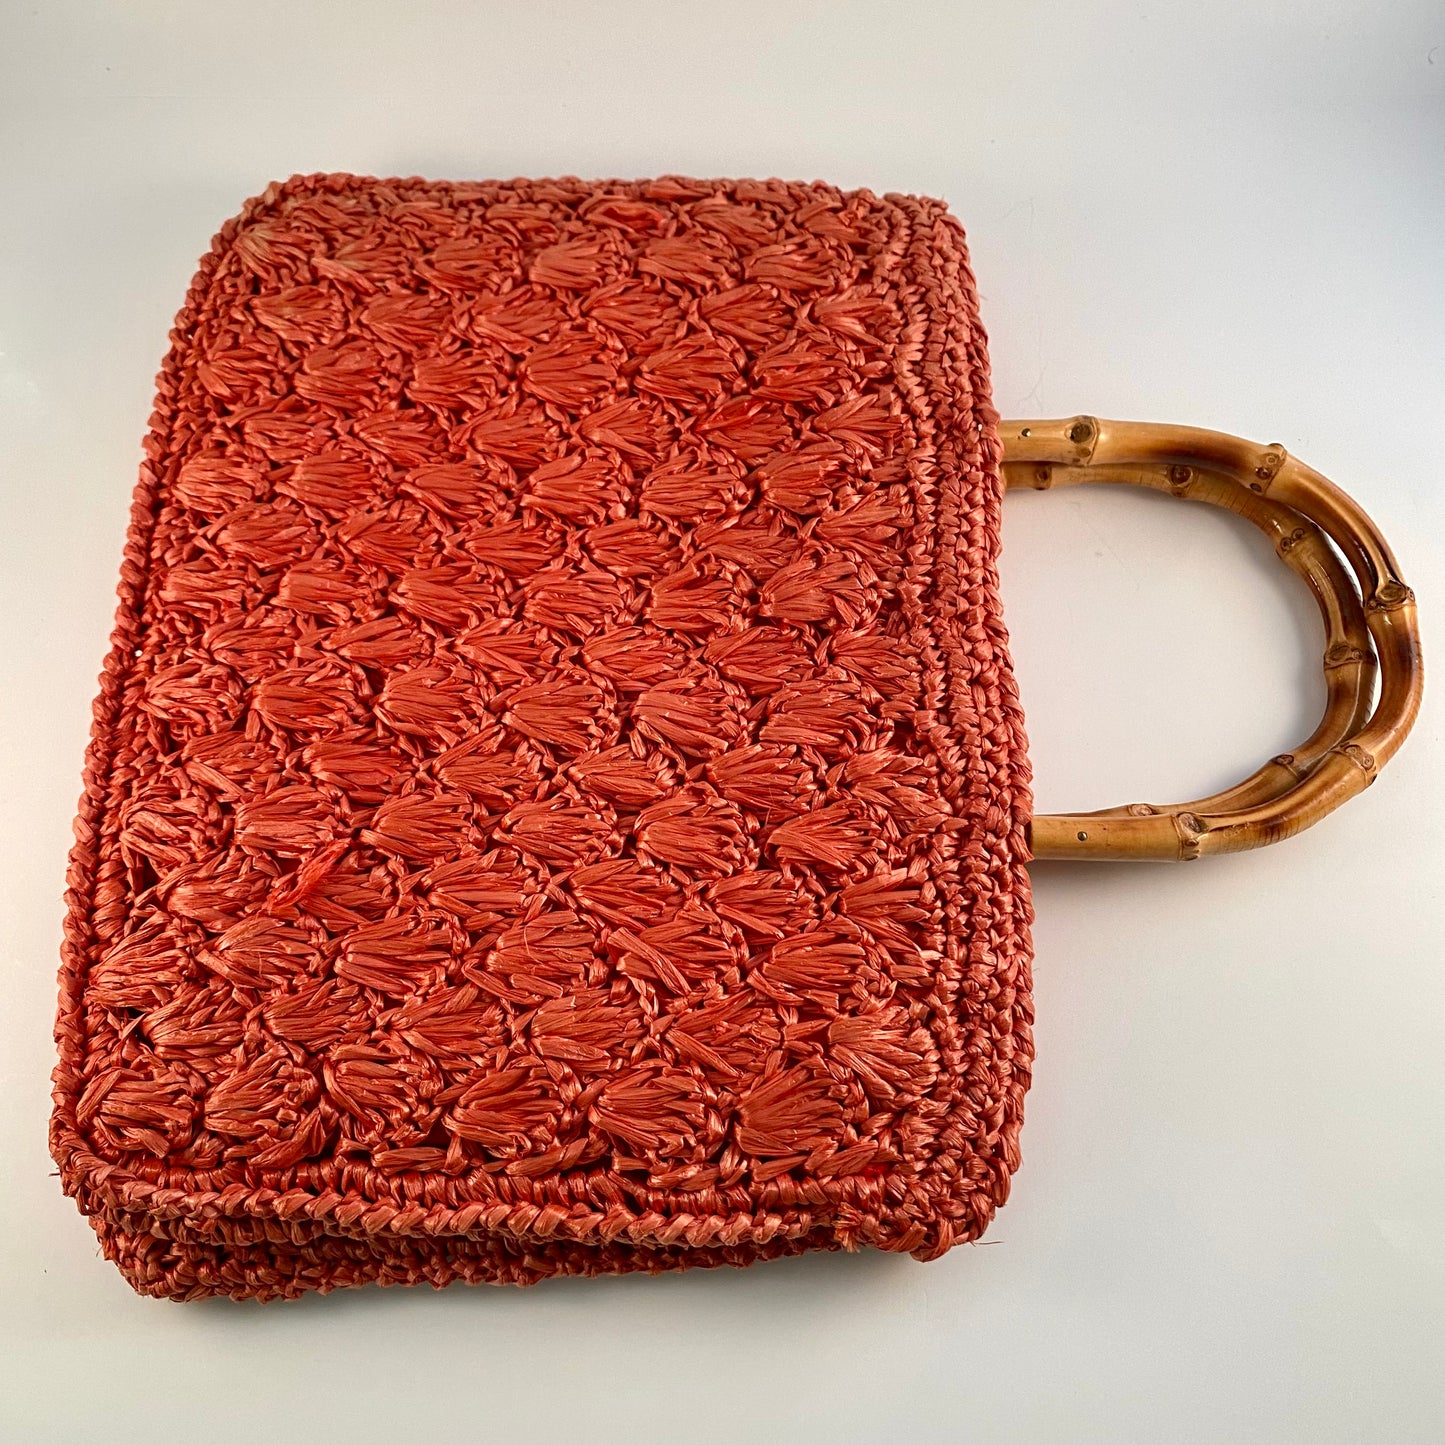 1960s Made In Japan Woven Raffia Bag